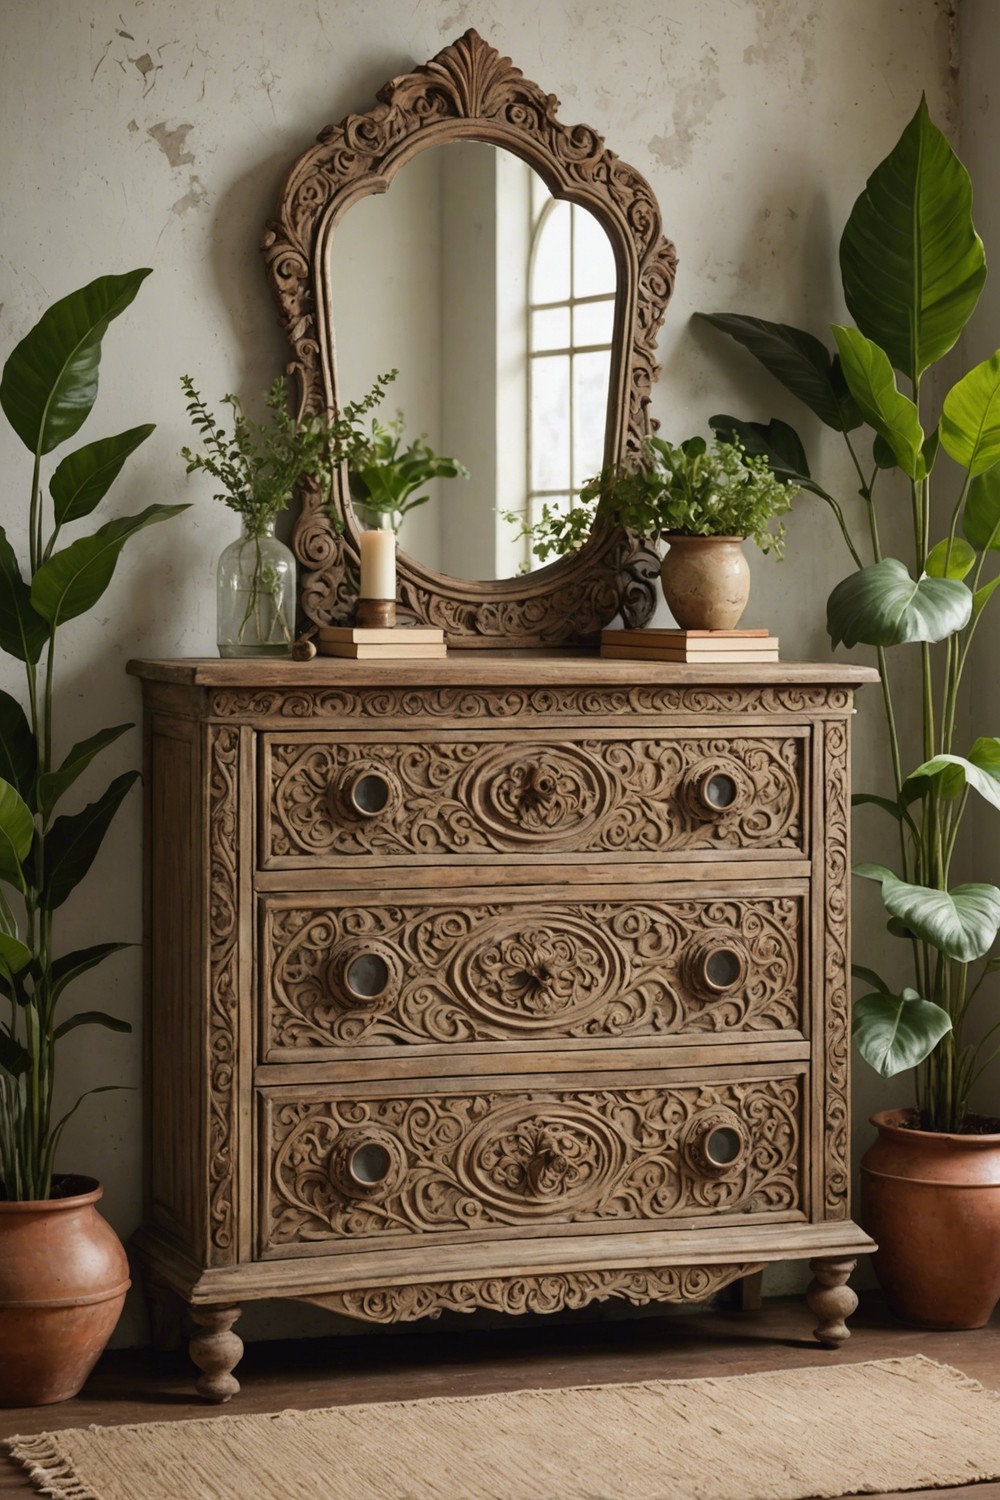 Hidden Storage Compartments in Boho-Style Dressers